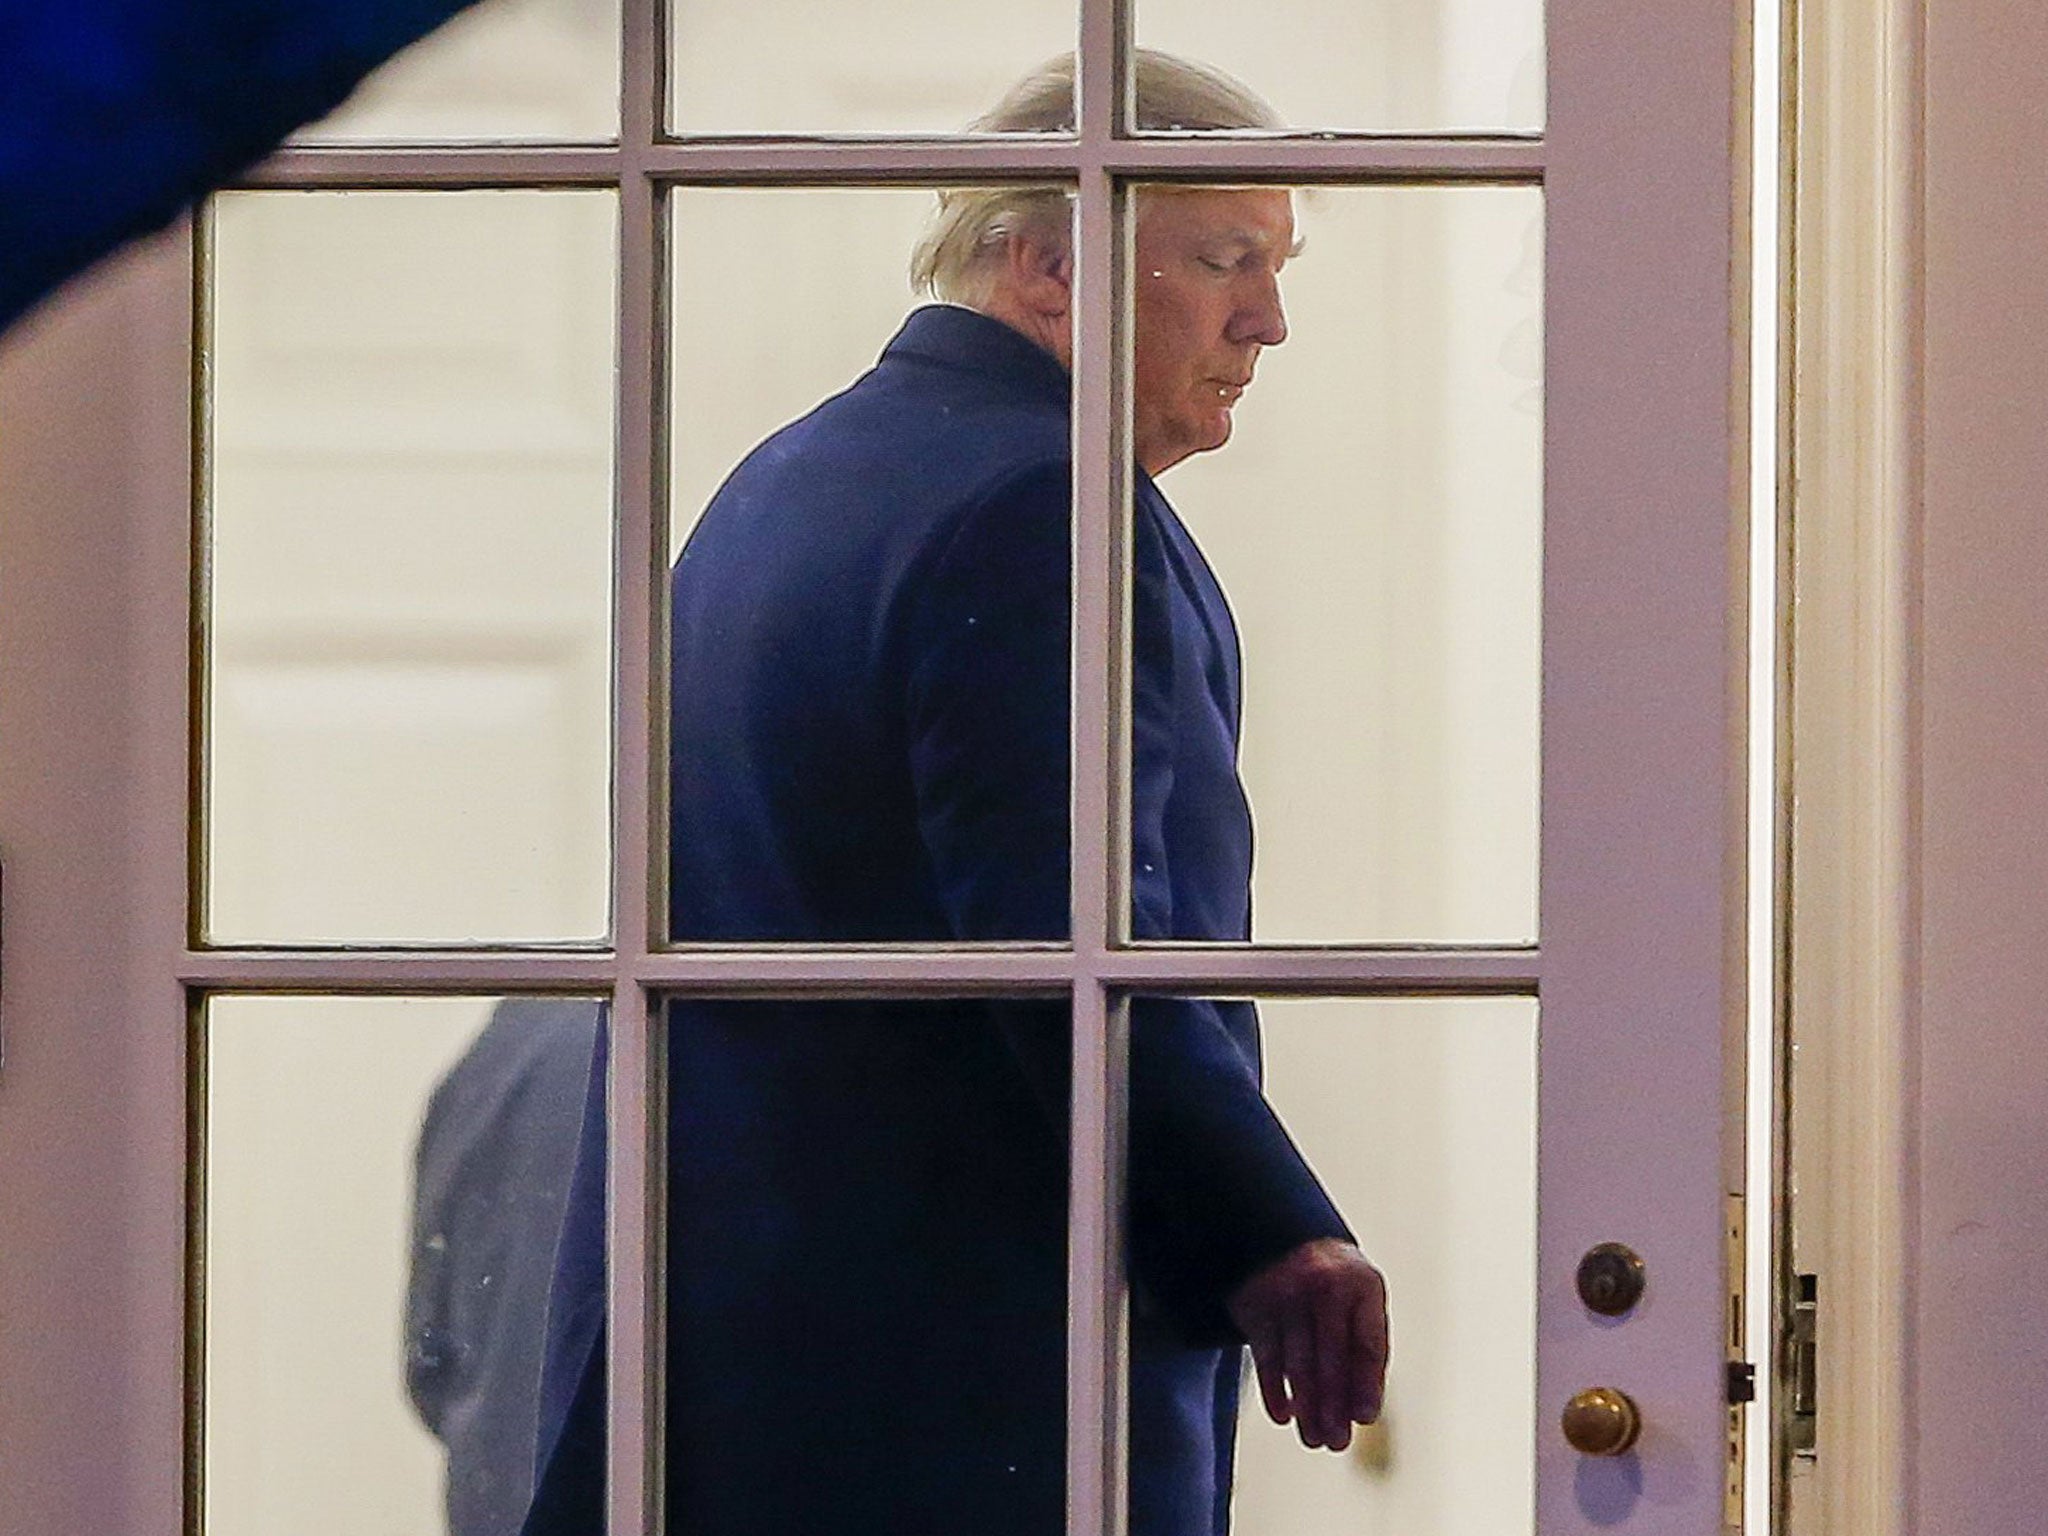 Donald Trump enters the Oval Office of the White House after arriving back on Marine One in Washington, DC from a weekend at his Mar-a-Lago club in Florida